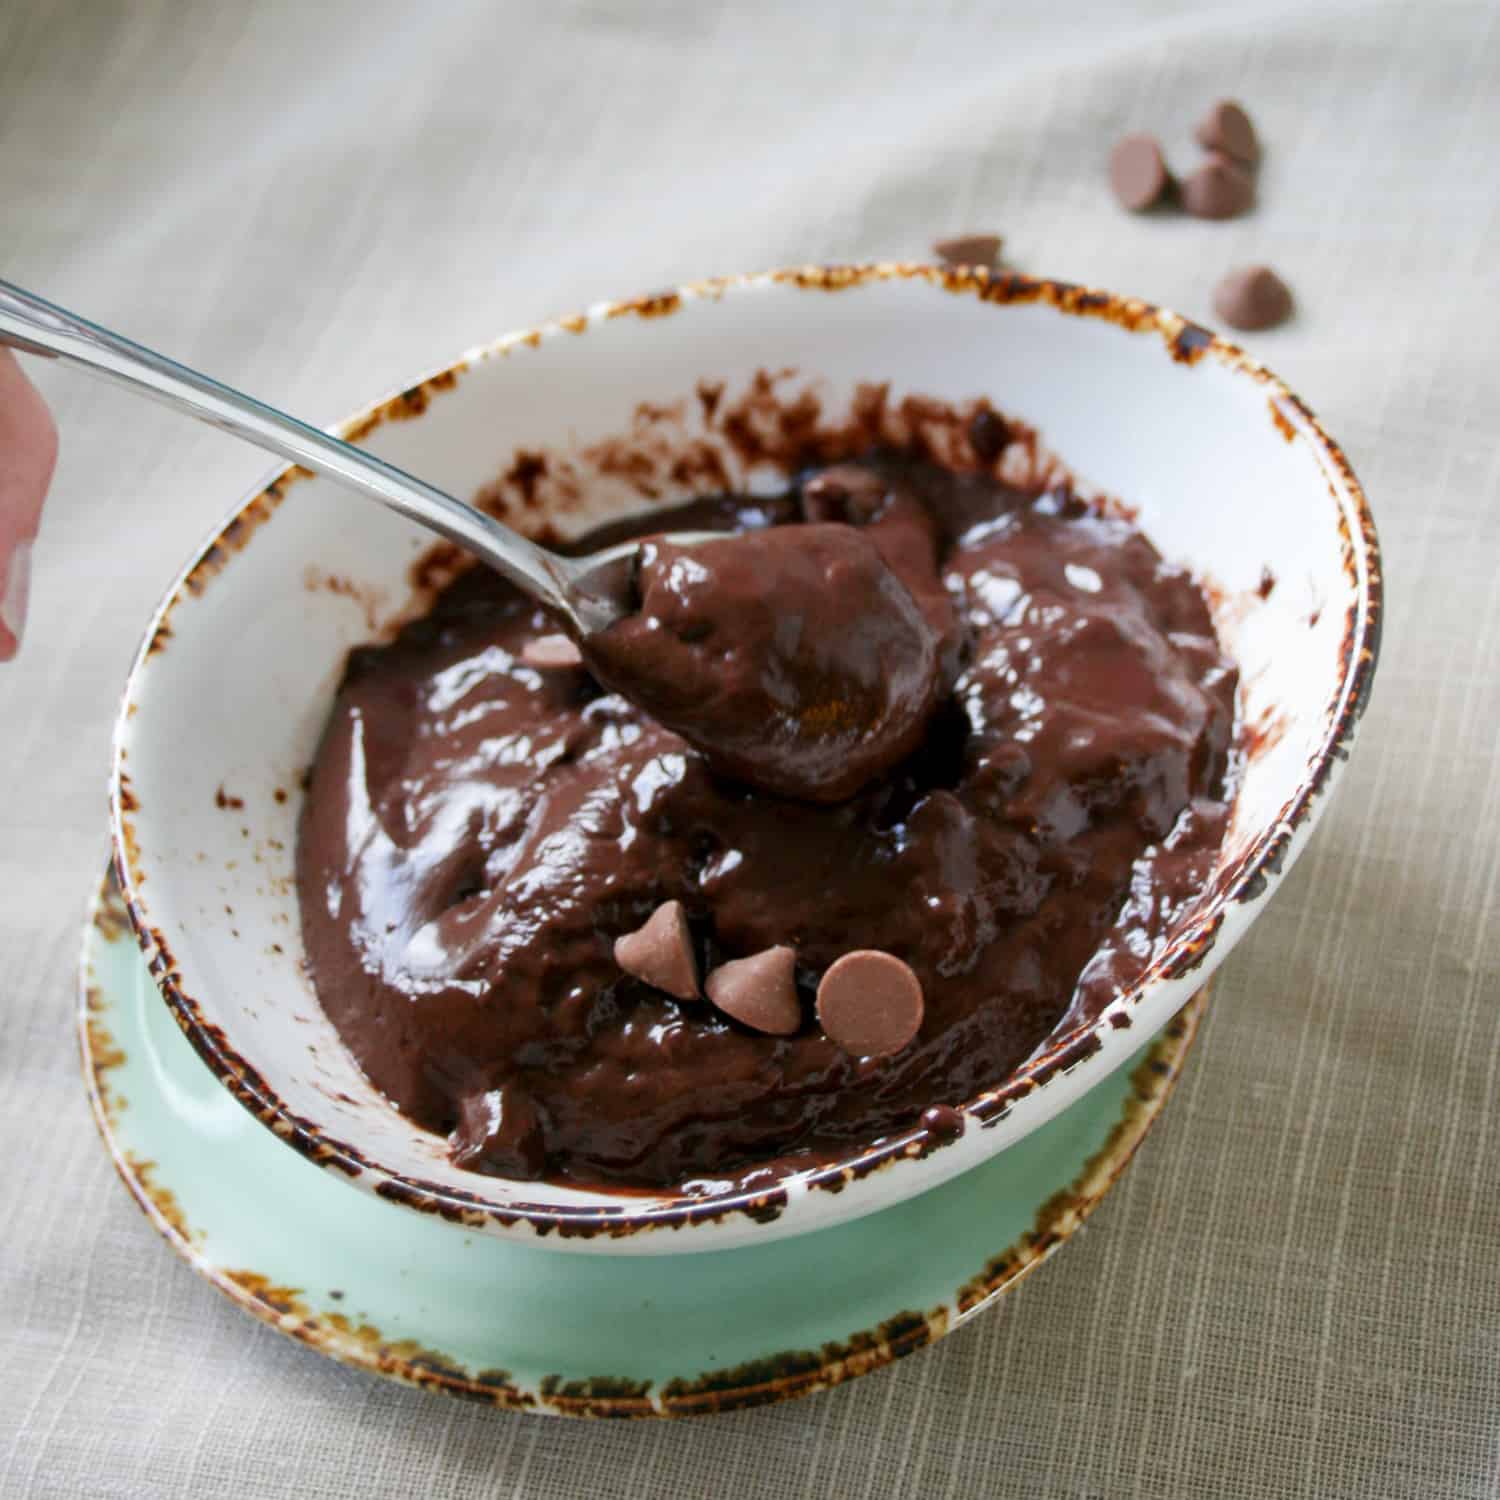 This clean eating chocolate pudding recipe is made for those of us looking for a healthier chocolate pudding option that tastes amazing, is mostly good for us and definitely doesn't contain avocado. Oh and it tastes like it's meant to - like chocolate! #cleaneating #cleaneatingchocolate #cleaneatingdessert